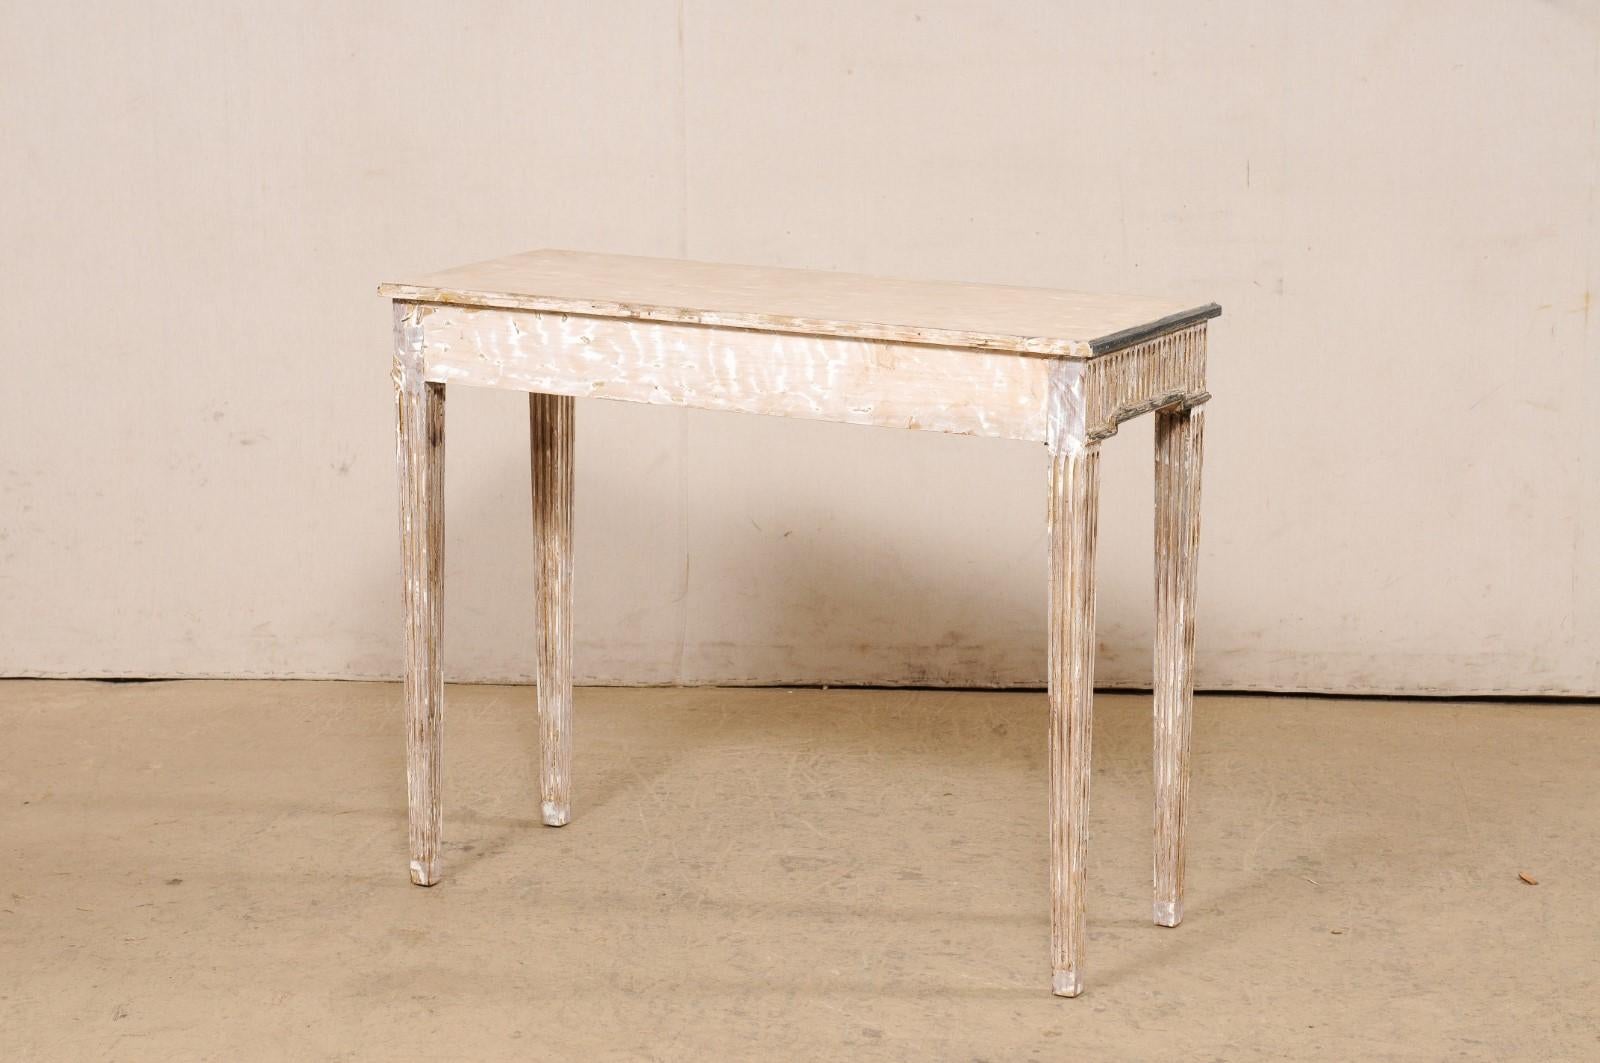 Wood A Slender Italian Console Table Embellished w/Fluted Carvings, Mid 20th C. For Sale